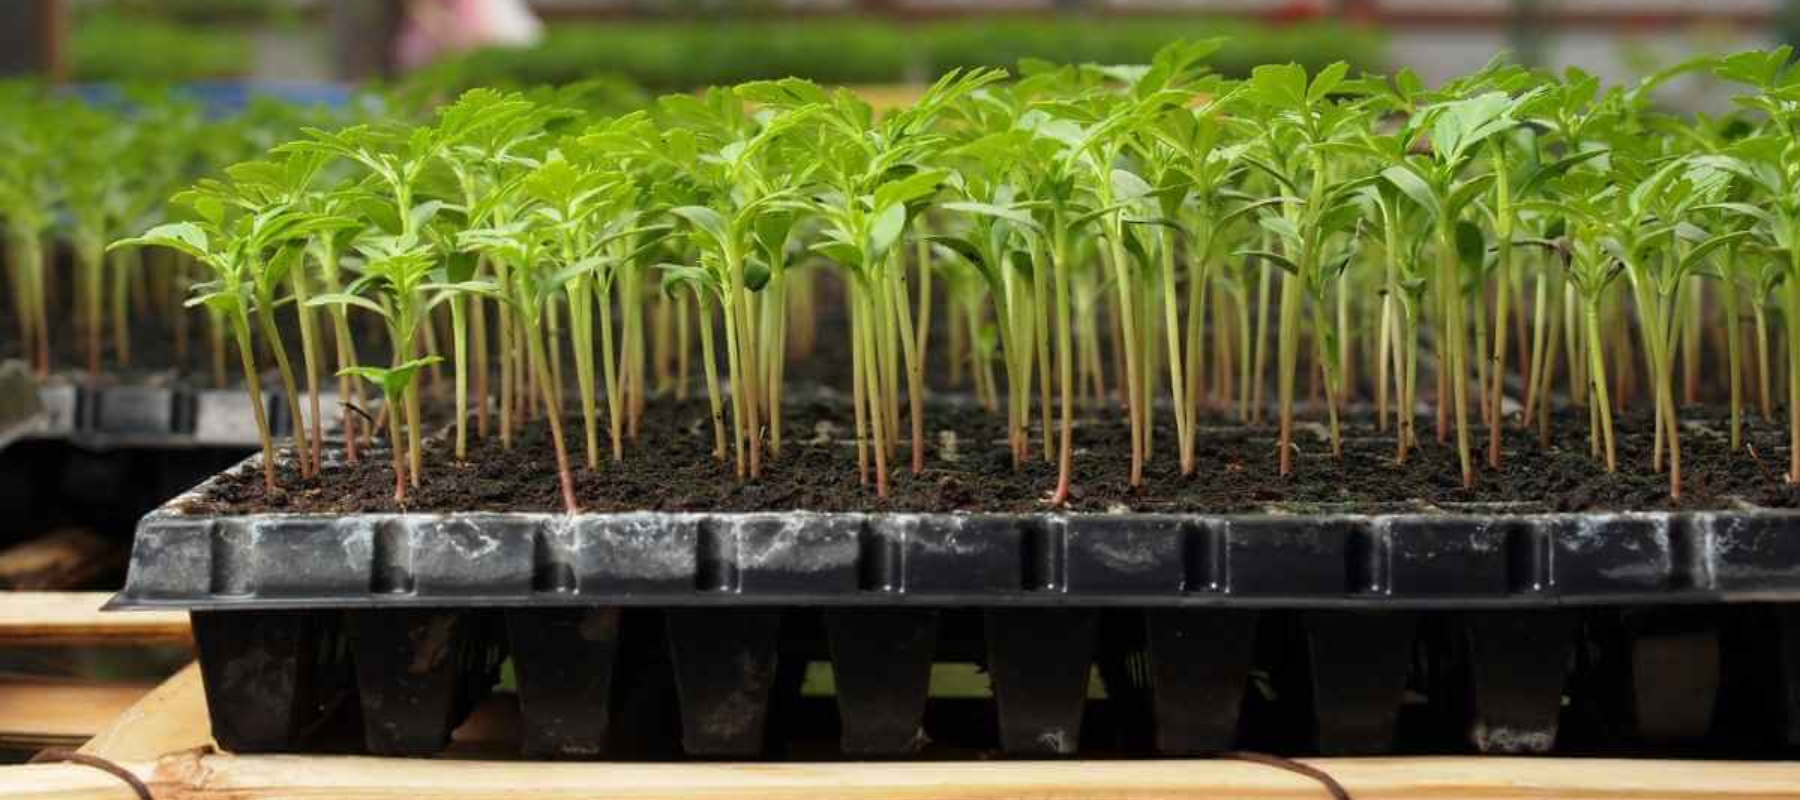 A Beginner's Guide to Starting Seeds Indoors